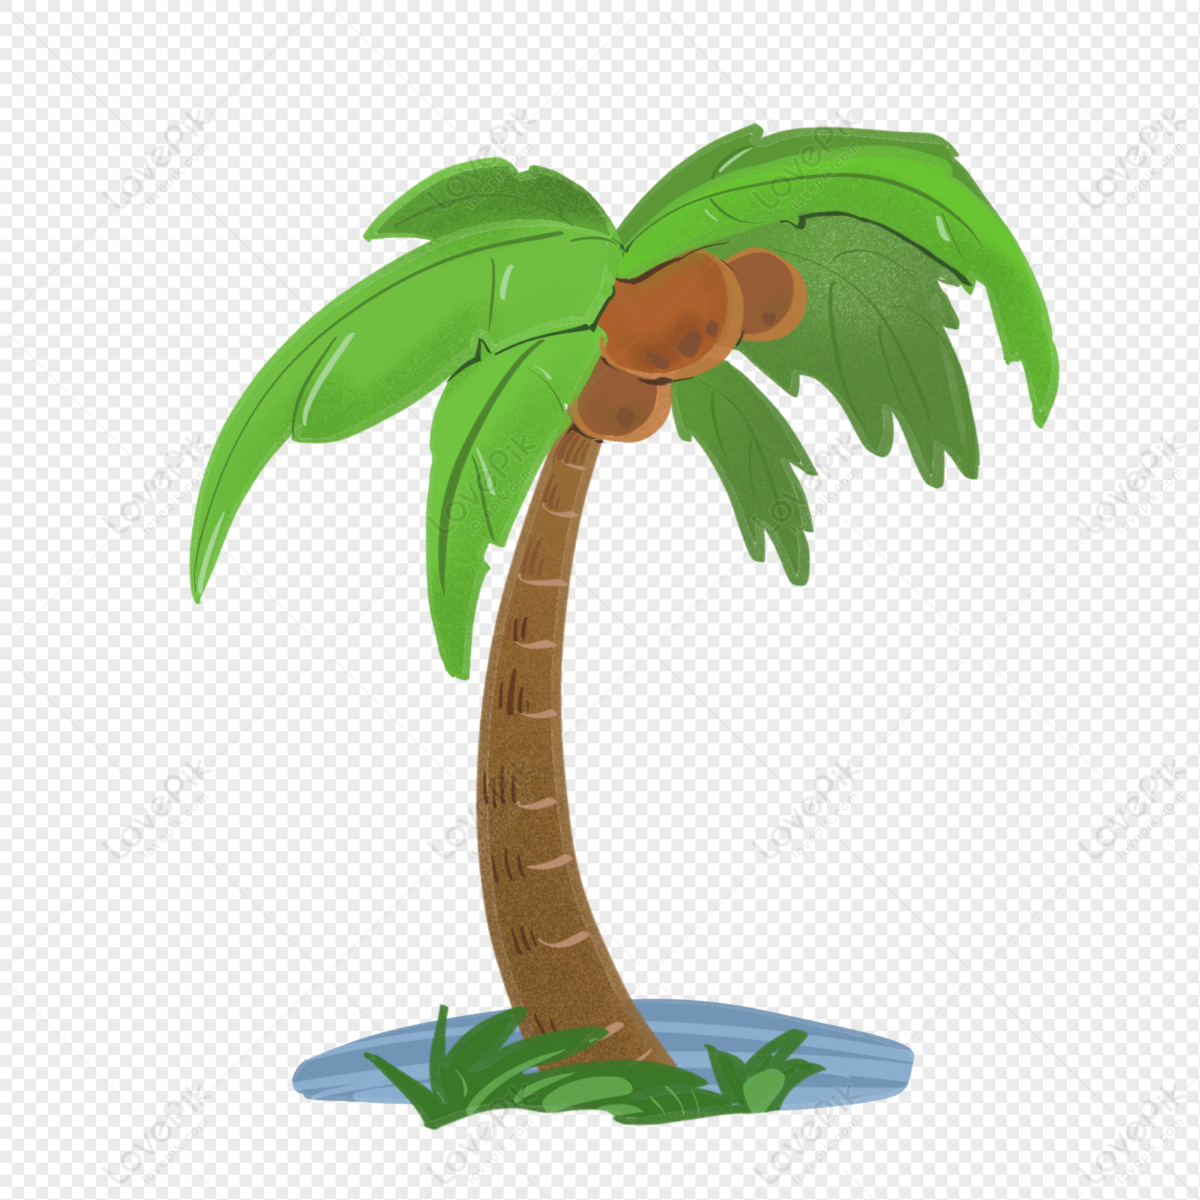 Coconut Tree Free PNG And Clipart Image For Free Download - Lovepik ...